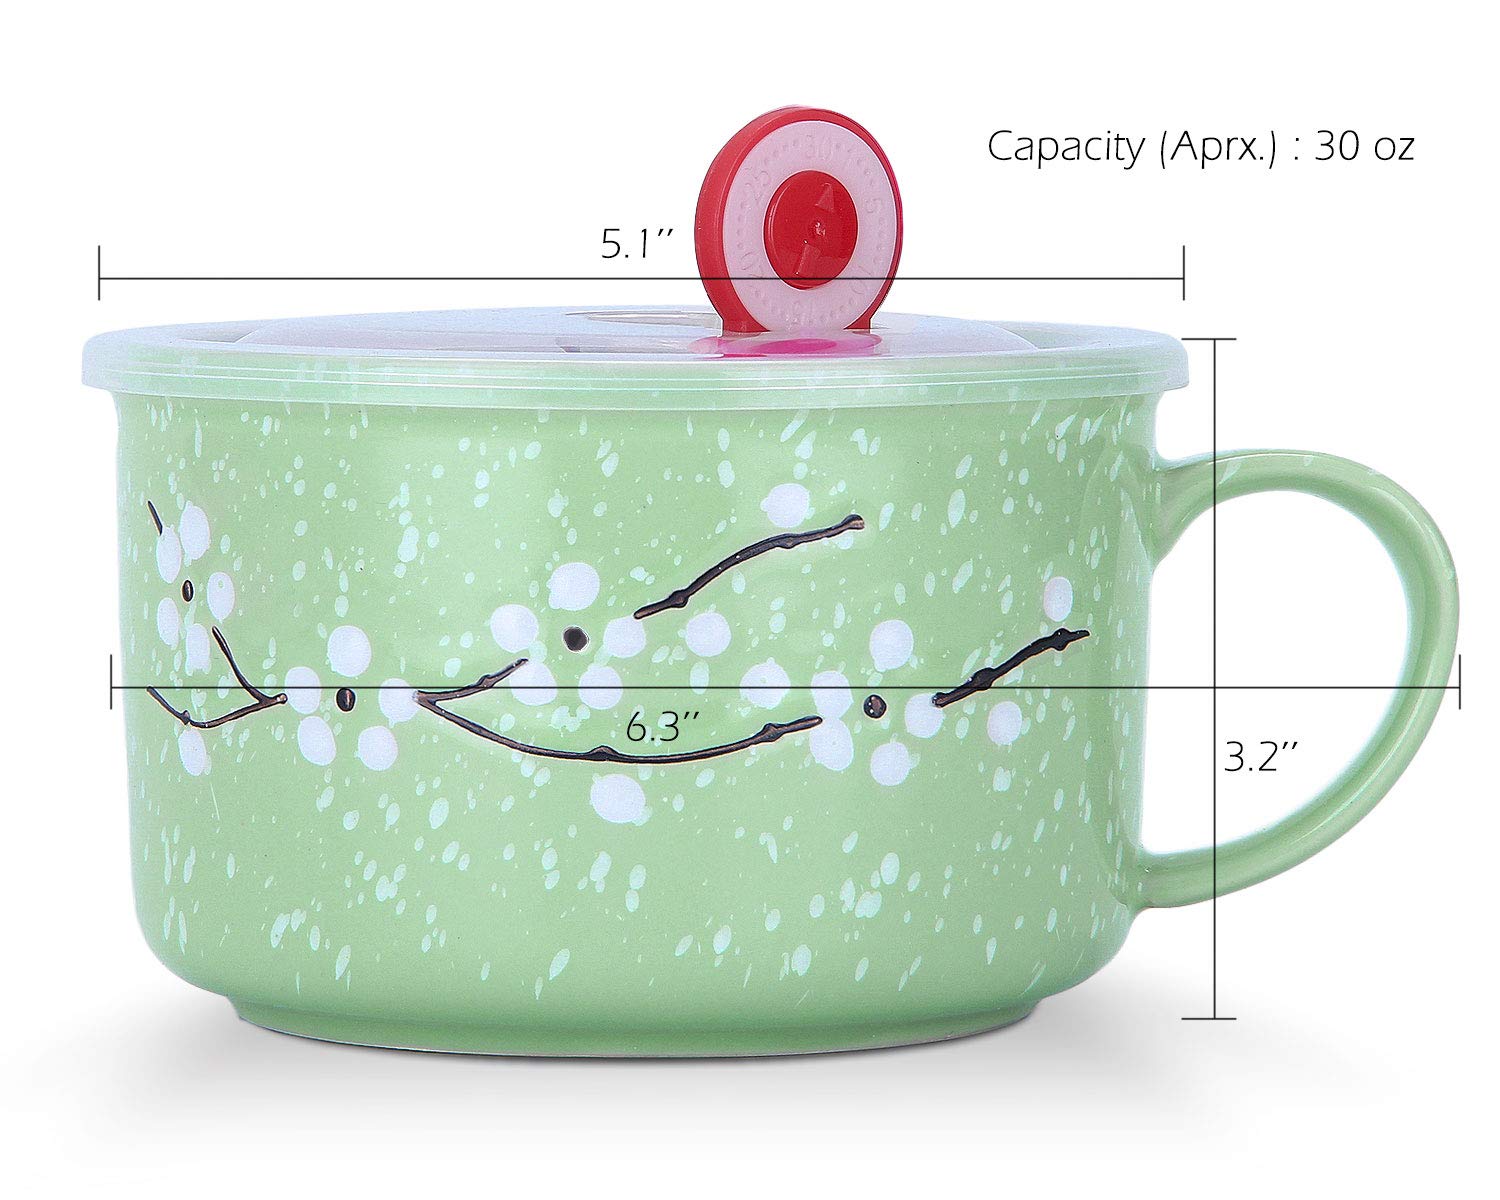 VanEnjoy 30oz Ceramic Bowl with Lid & Handle,Cherry Blossoms Among Snow Flake Pattern,Microwave for Instant Noodle Sara, Cereal Bowl